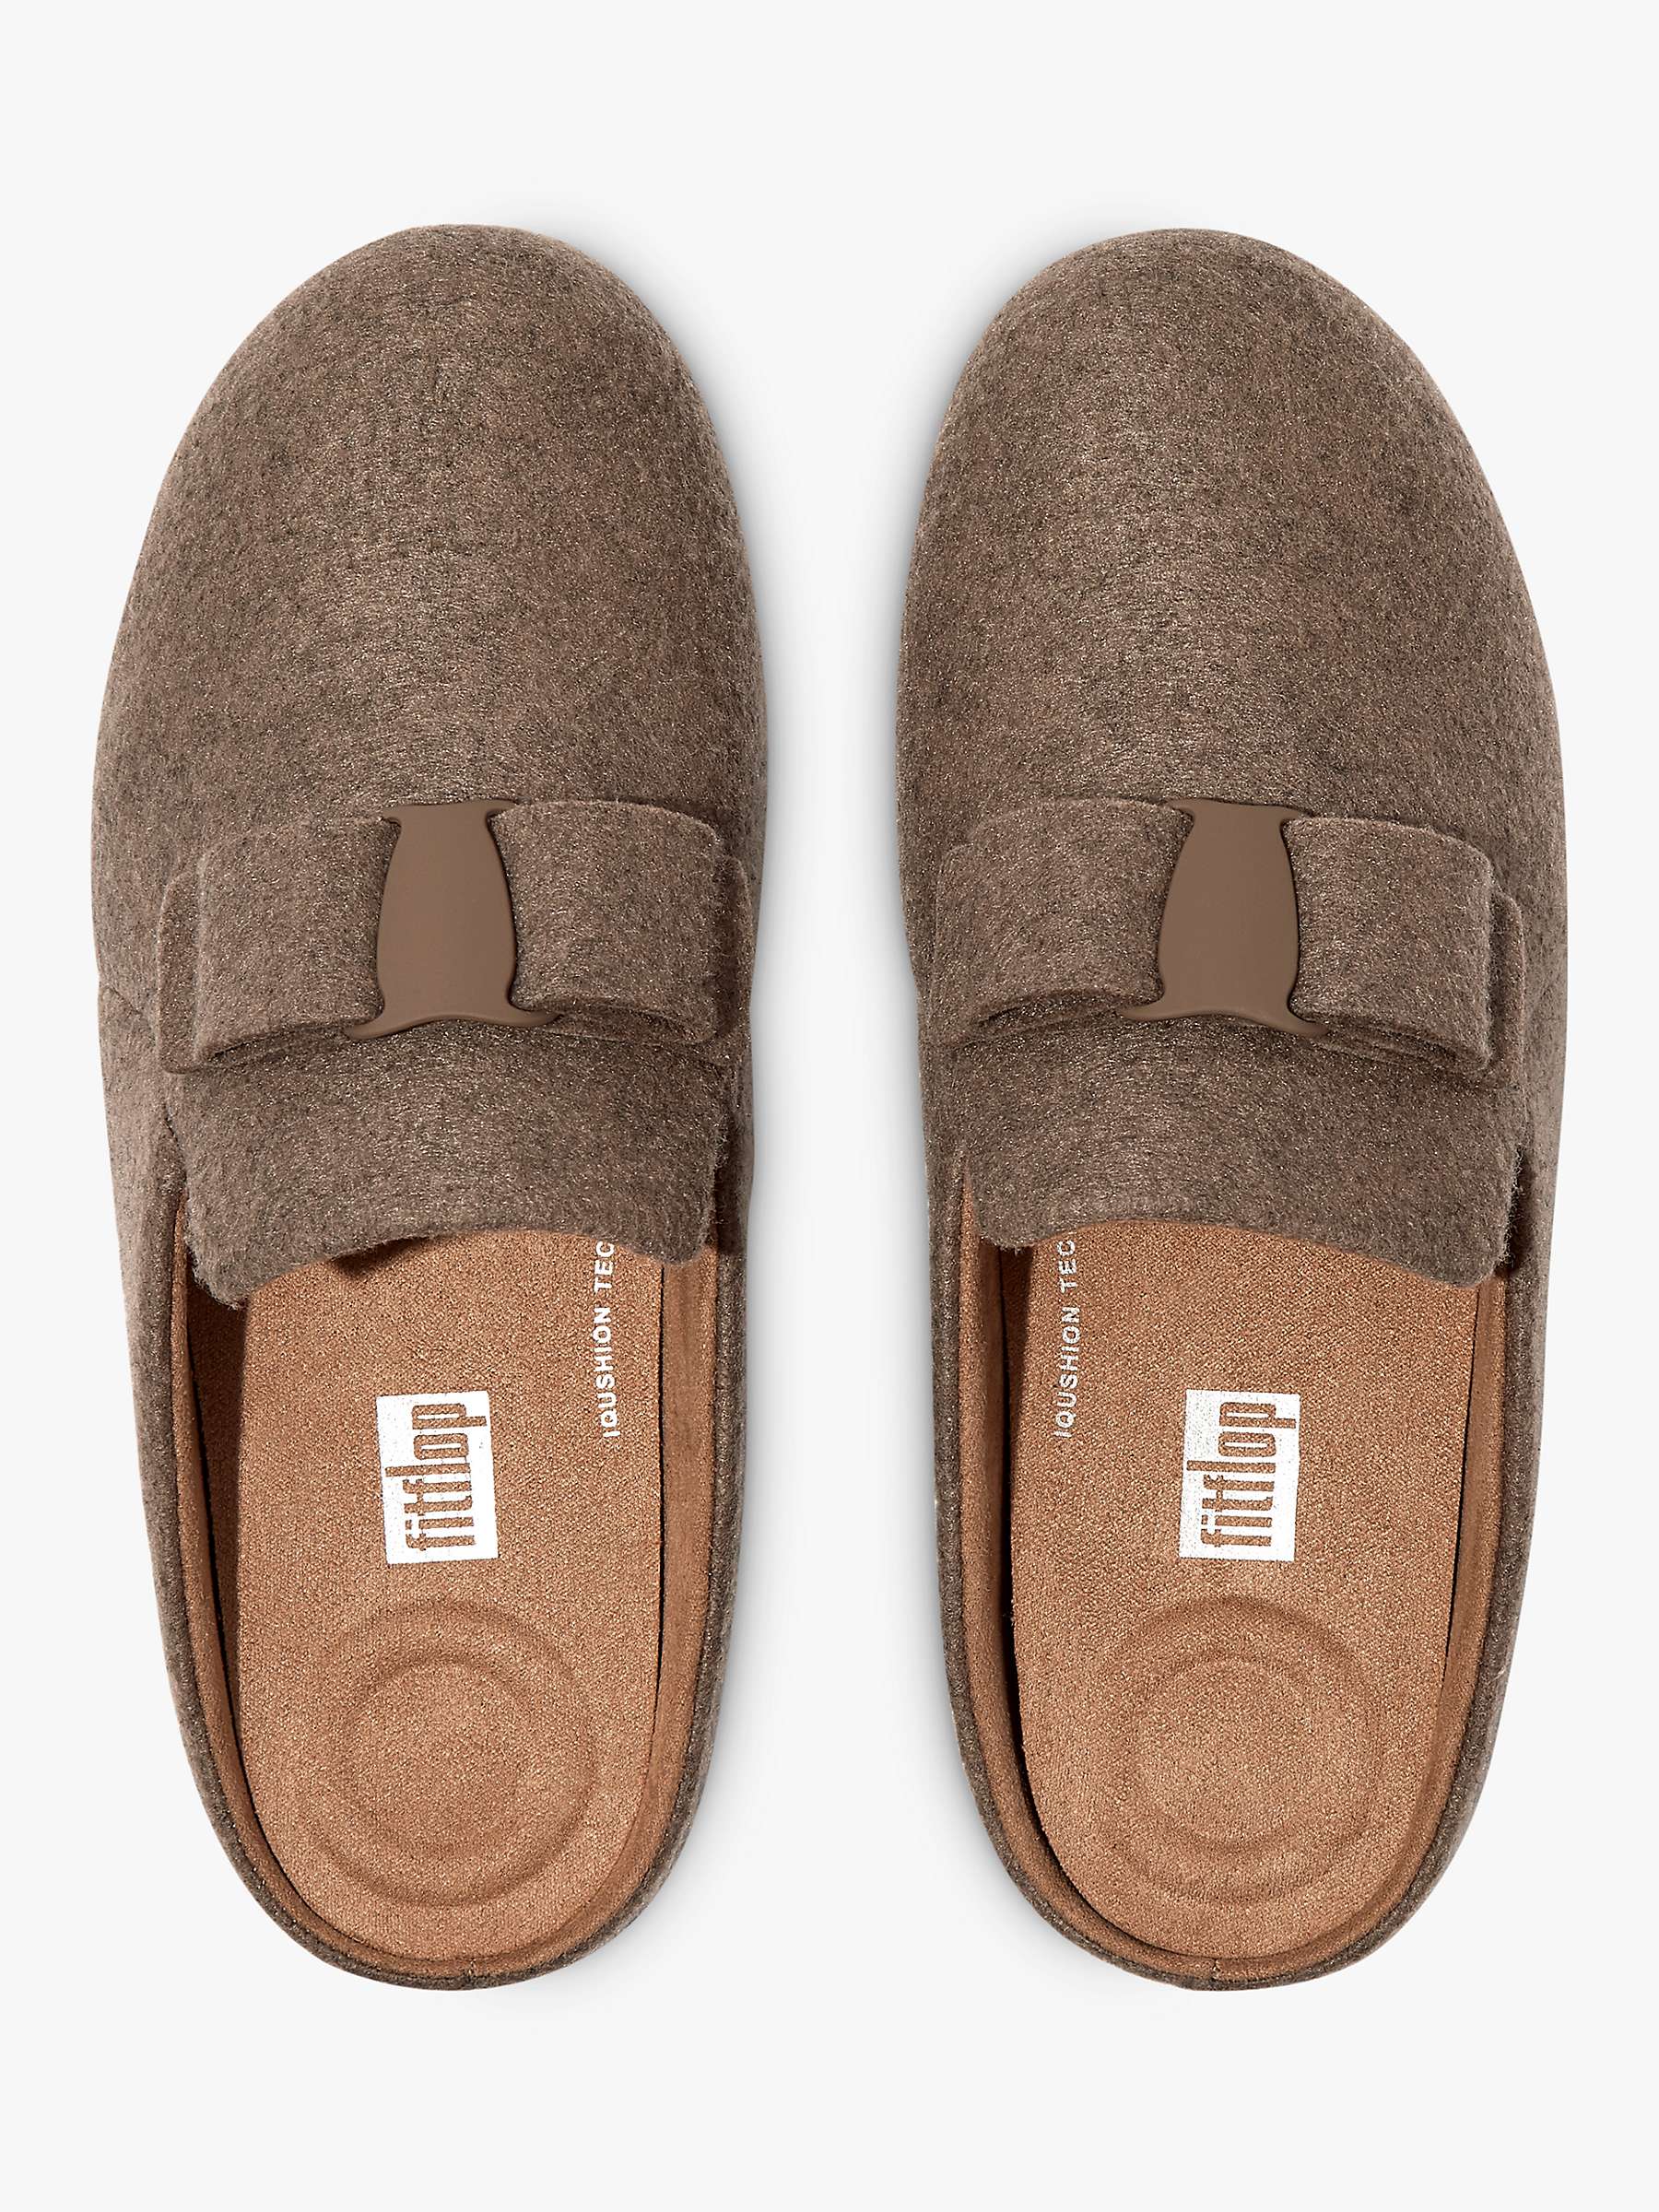 Buy FitFlop Bow Mule Slippers Online at johnlewis.com